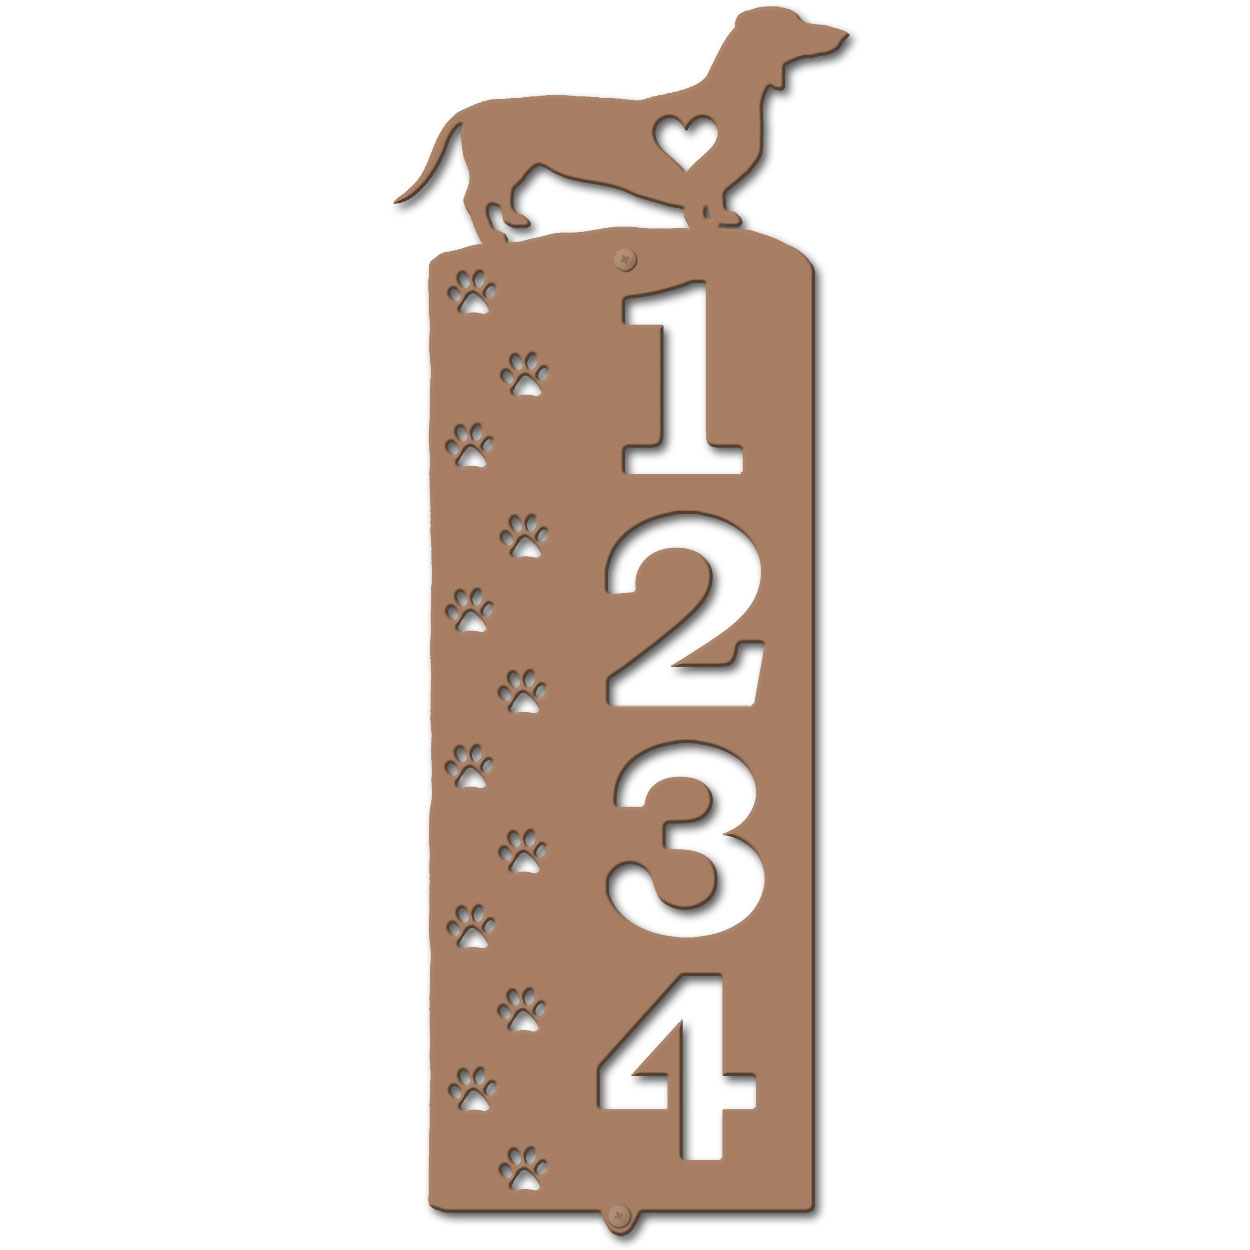 636184 - Dachshund Cut Outs Four Digit Address Number Plaque